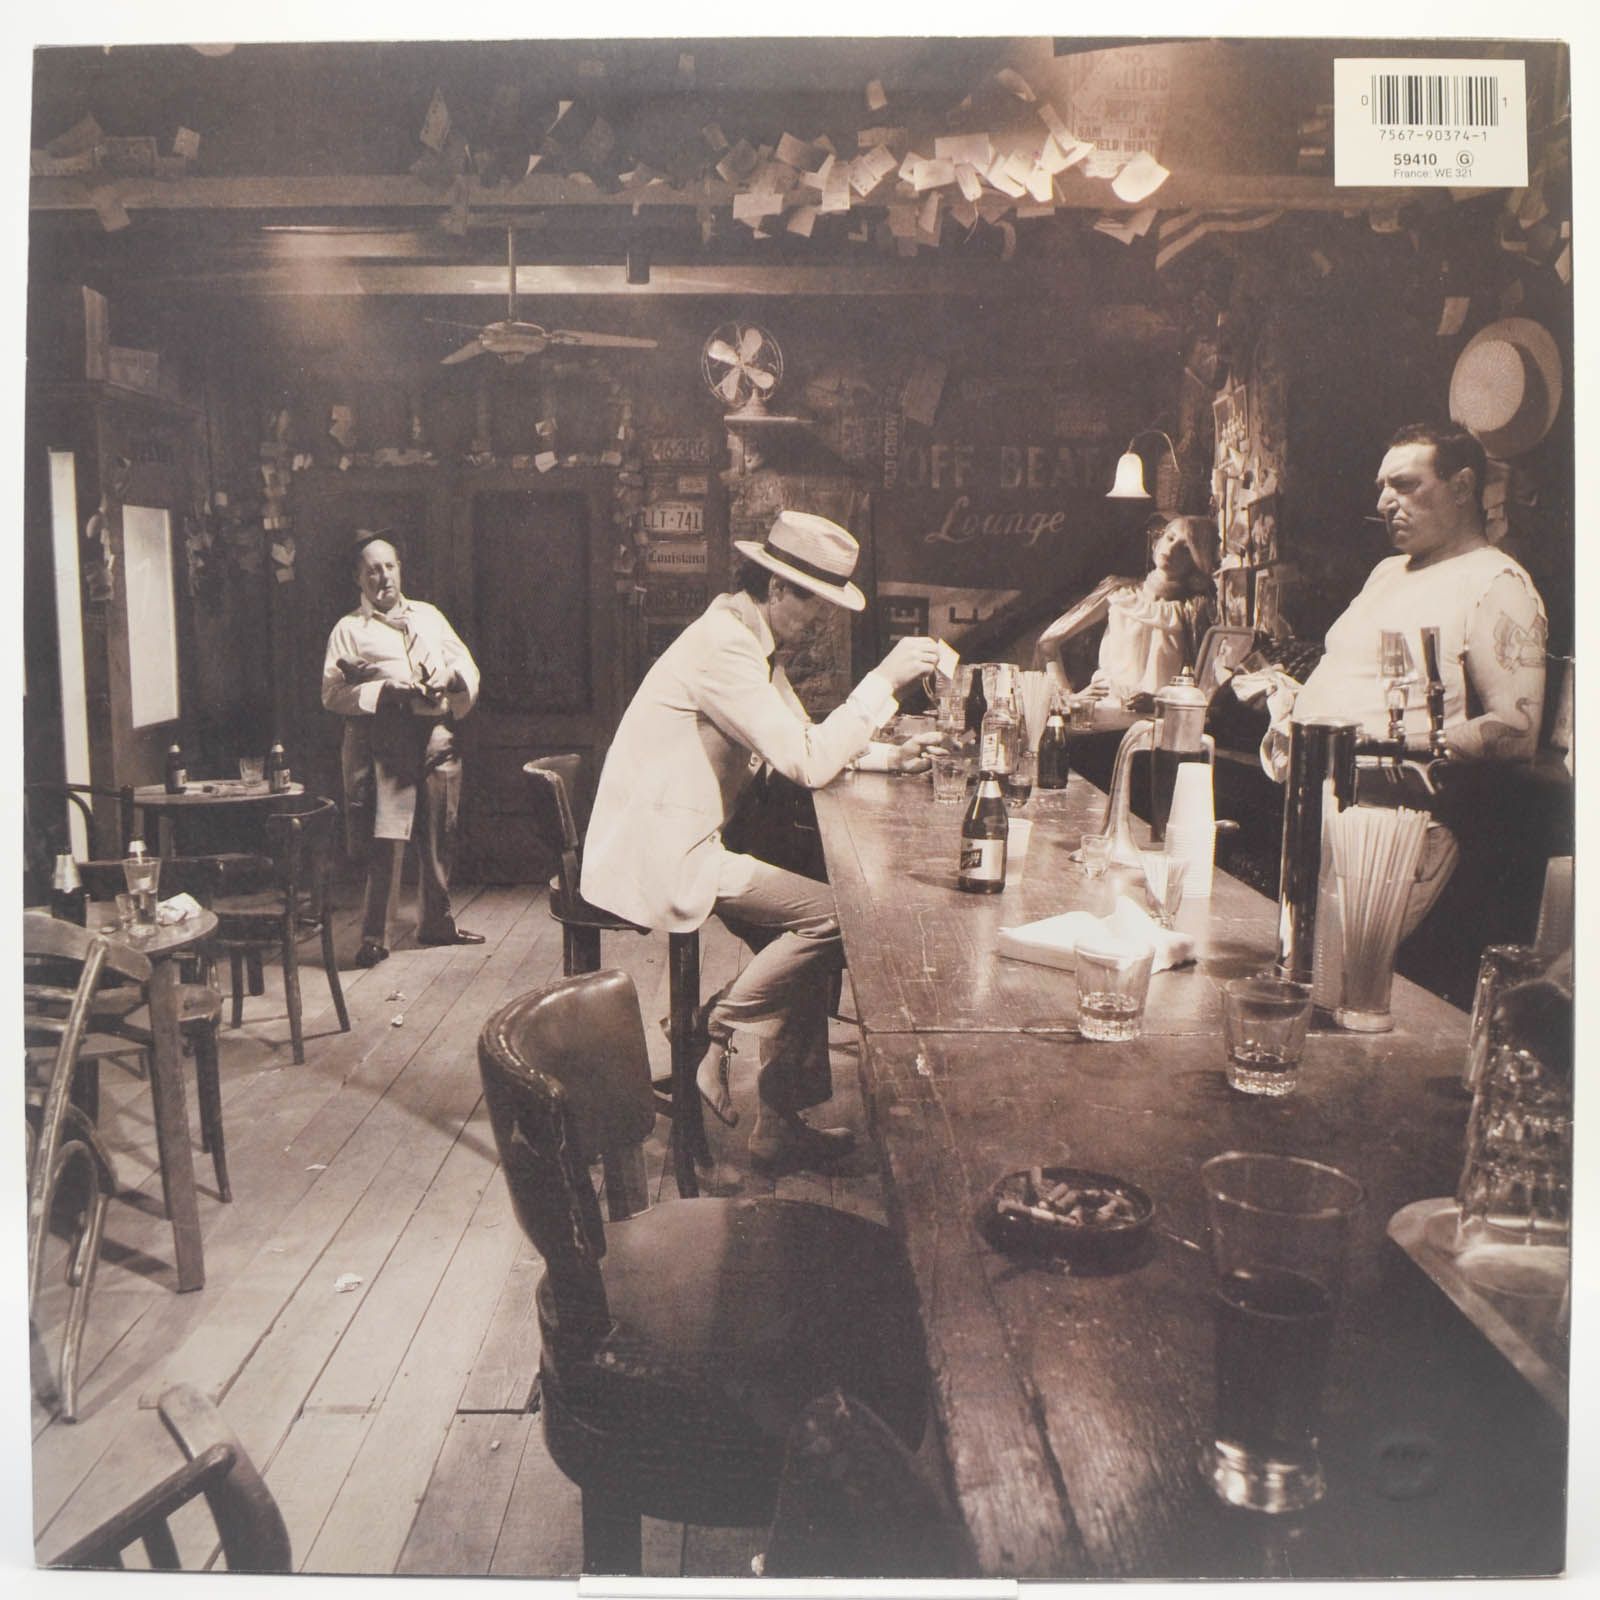 Led Zeppelin — In Through The Out Door, 1979